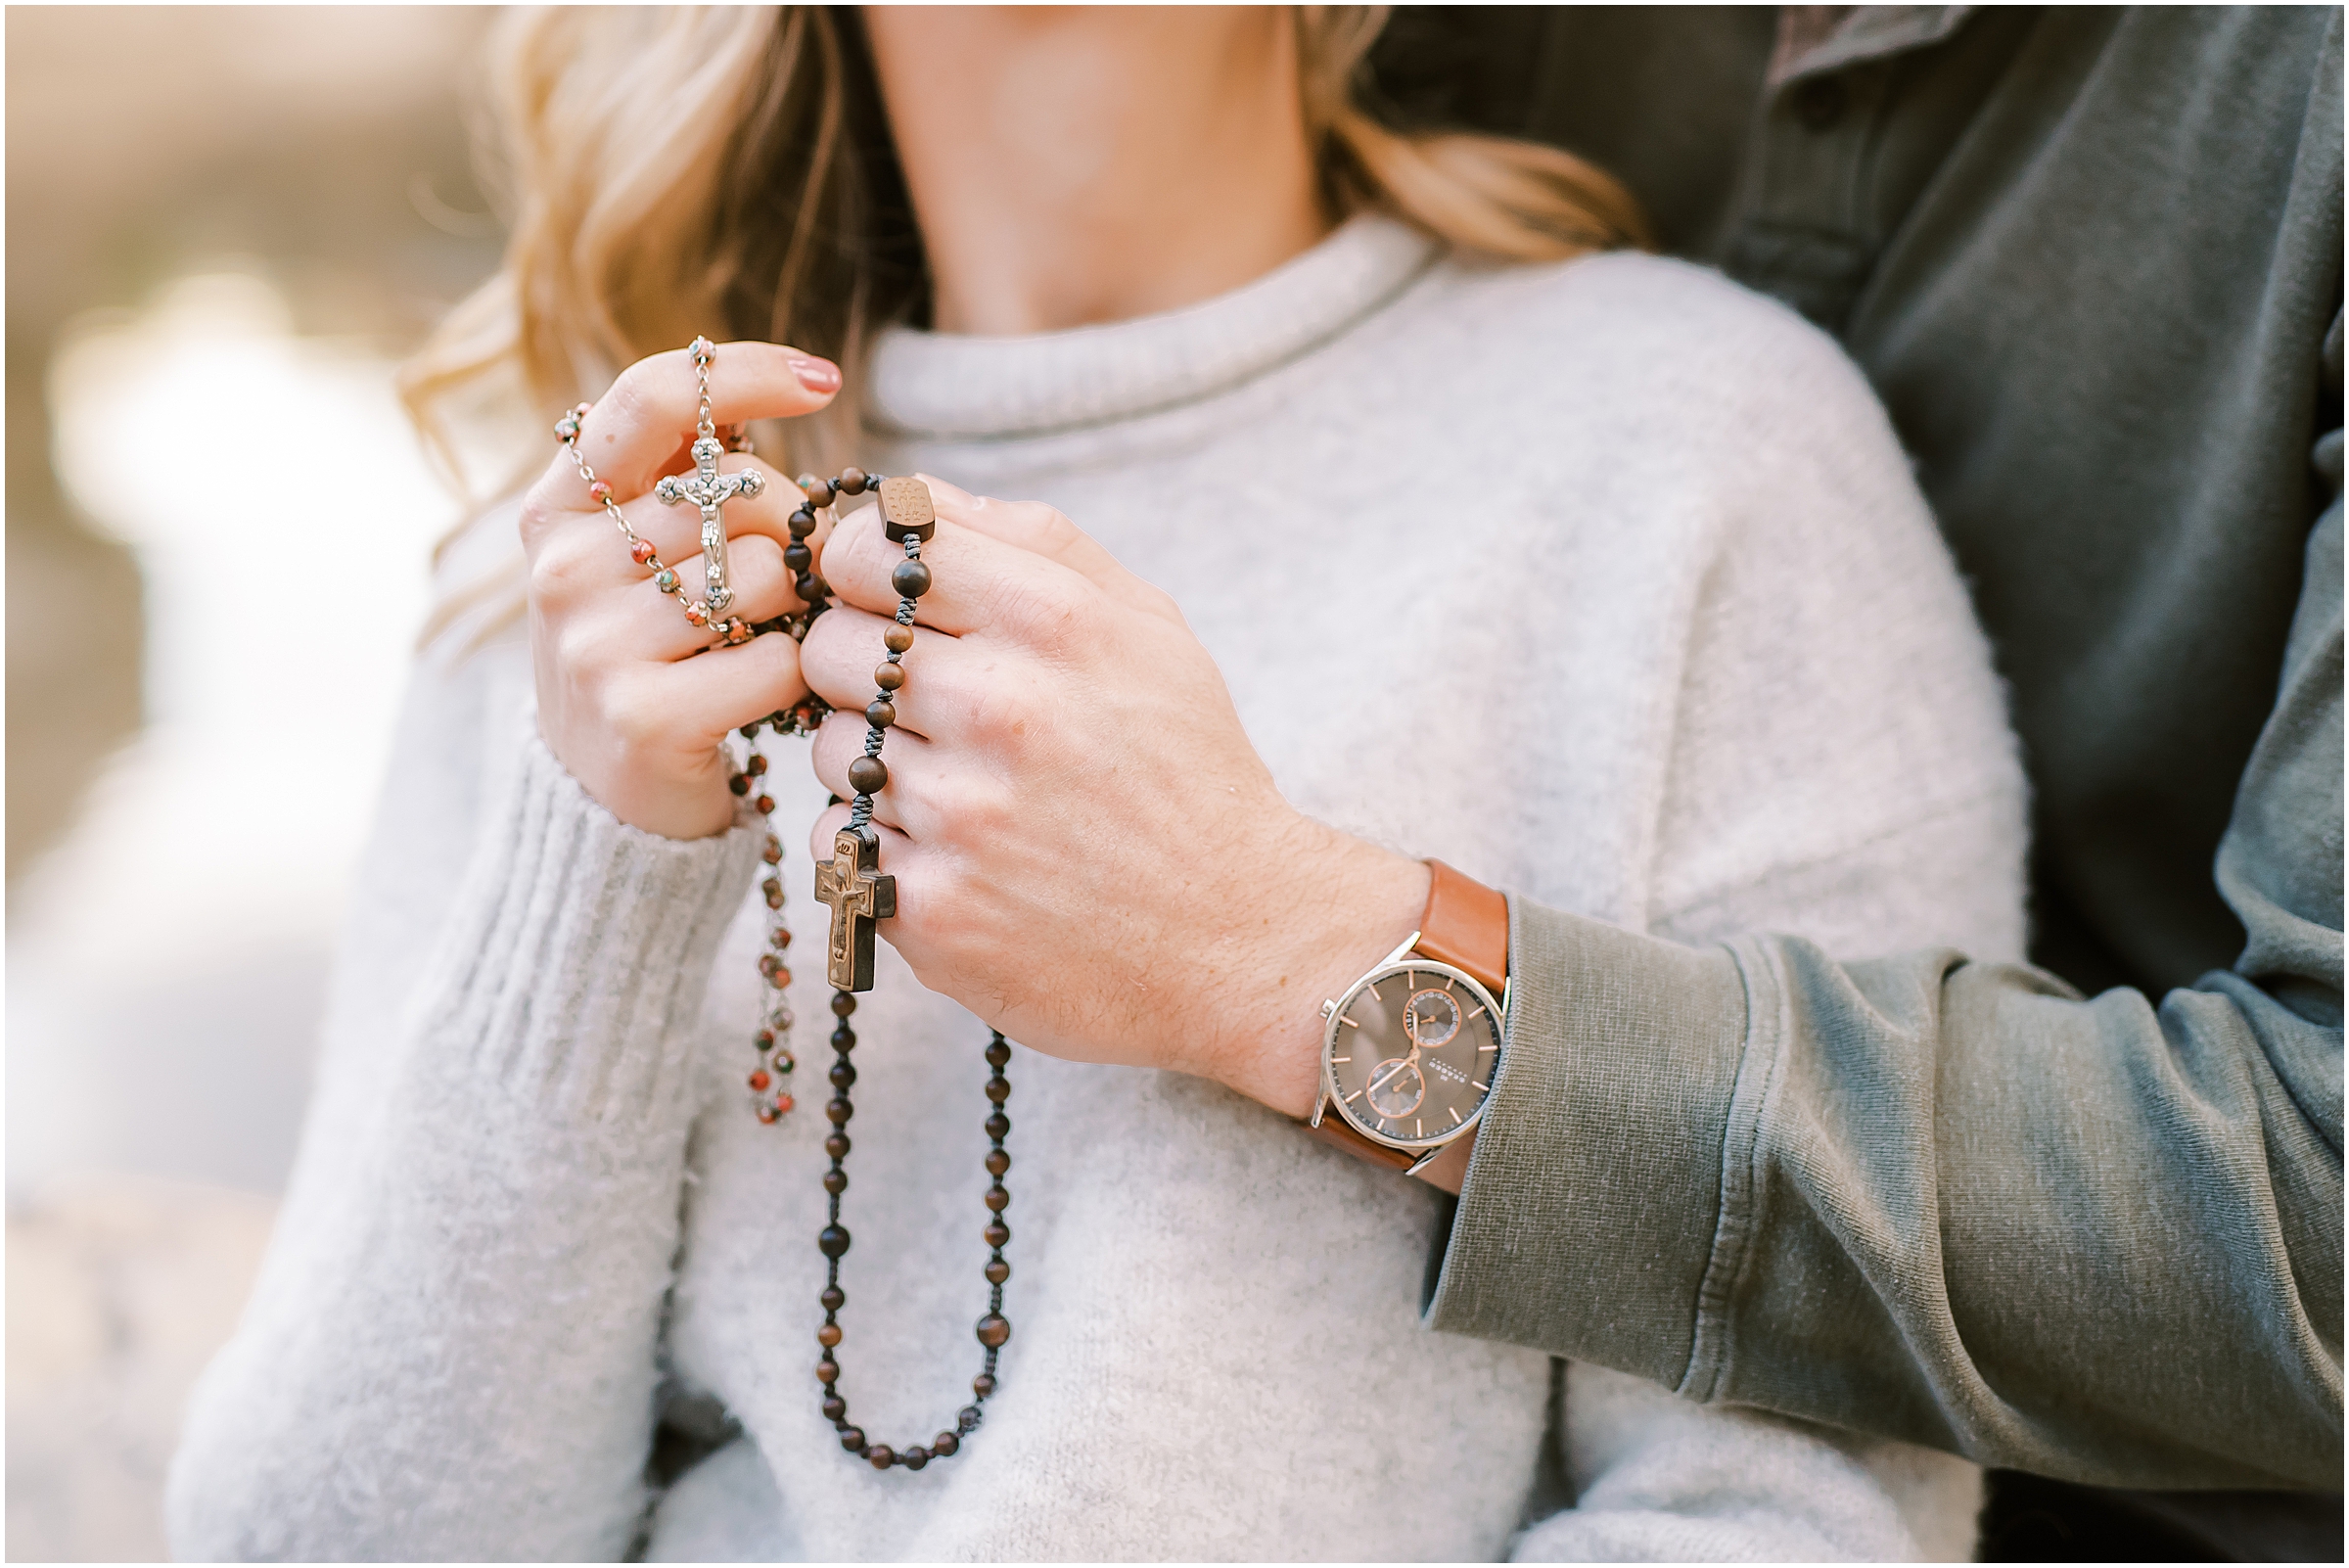 Couple holding rosary in hands